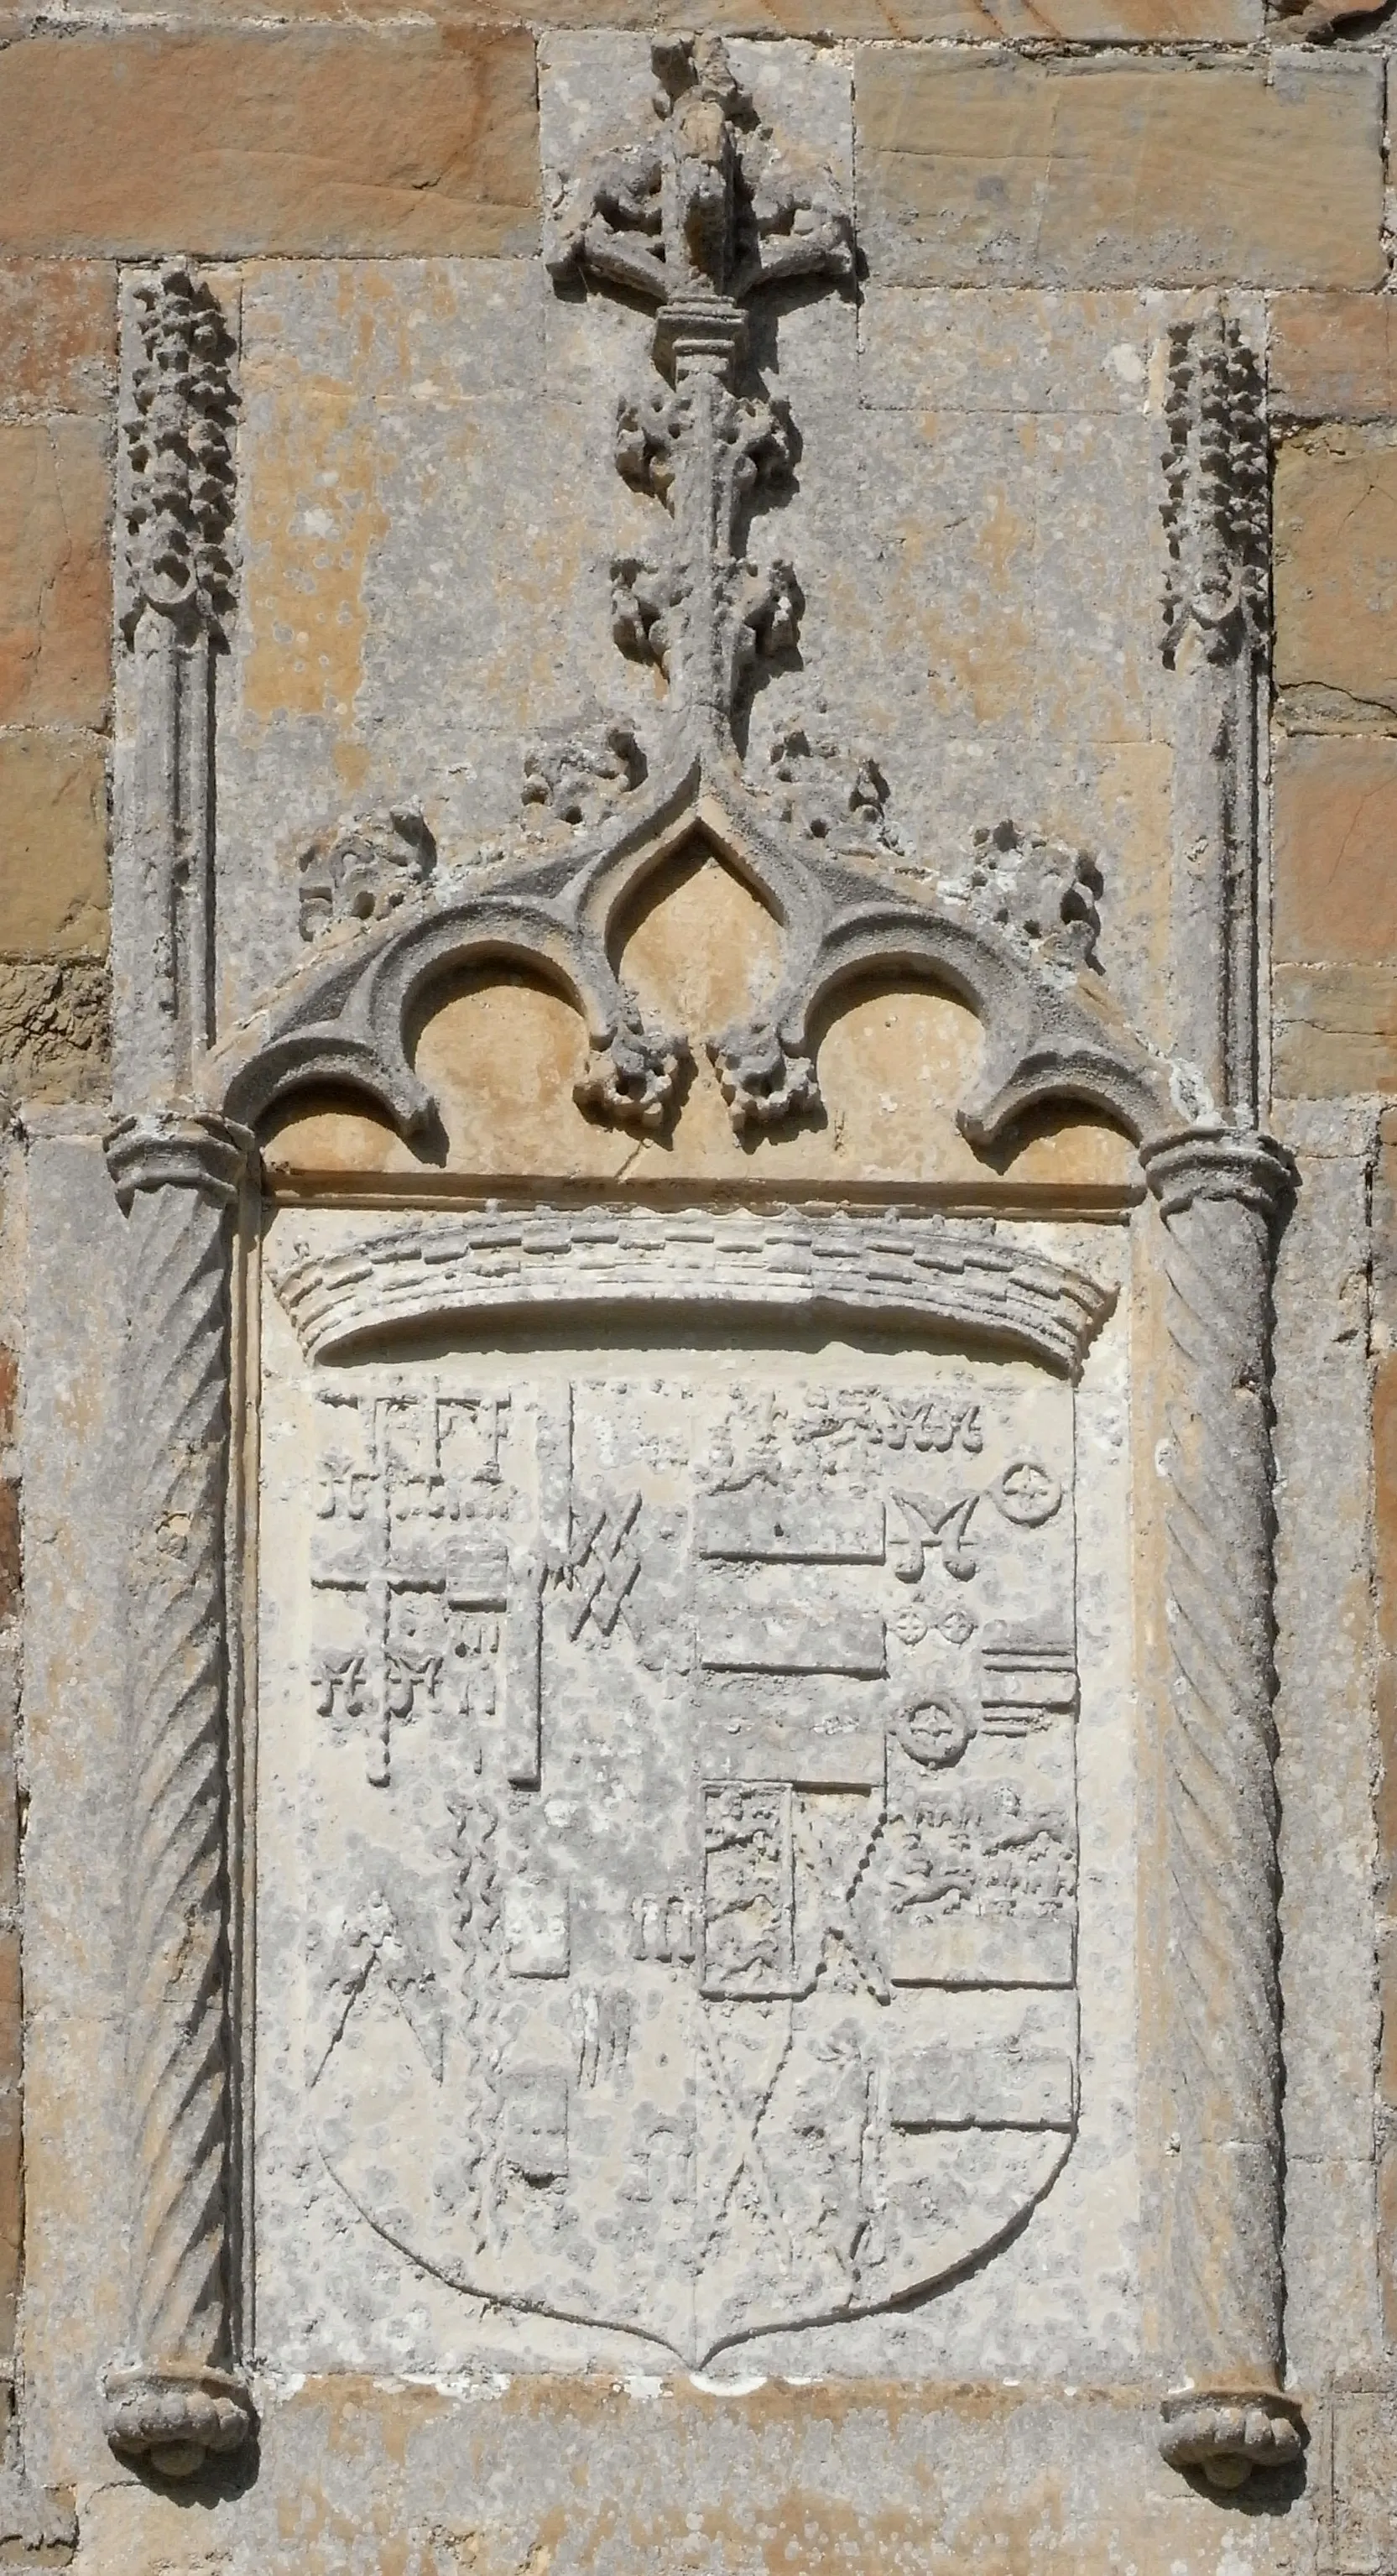 Photo showing: Arms of Bourchier impaling Manners, as sculpted above SE door to Tawstock Church, Devon Arms of Bourchier impaling Manners, sculpted above SE door to Tawstock Church, Devon. Representing arms of John Bourchier, 2nd Earl of Bath (1499-1560/61) with 10 quarterings (as also shown on the gatehouse of Tawstock Court and on the monument of Lady Frances Bourchier (d.1612) in the Bedford Chapel, Chenies, Buckinghamshire, daughter of the 3rd Earl of Bath [1]):

1)Argent a cross engrailed gules between four water bougets sable (Bourchier)
2) Gules, a fess argent between 15 billets or  5,4,3,2,1 (Louvaine) (across the first two quarters is a label of three points for difference)
3)Quarterly per fess indented argent and gules (FitzWarin)
4)Gules, a fret or (Audley)
5)Argent, three aspen leaves erect gules (Cogan)
6)Sable, a chevron barry nebuly argent and gules (Hankford)
7)Argent, two bars wavy sable (Stapledon)
8)Argent, two bars gules each charged with three bezants (Martin)
9)Gules, four fusils in fess ermine (Dinham)
10)Gules, three pairs of arches argent (Arches)) Impaling arms of his 2nd wife Eleanor Manners, daughter of George Manners, 11th Baron de Ros (c.1470-1513) with 4 grand quarterings:

1st & 4th: Or, two bars azure a chief quarterly azure and gules; in the 1st and 4th quarters two fleurs-de-lis and in the 2nd and 3rd a lion passant guardant all or (Manners)
2nd: quarterly of 4:
1: Gules, three water bougets argent (de Ros)
2: Azure, a Catherine wheel or (Belvoir)
3: Gules, three catherine wheels argent (Espec, for Walter Espec)
4: Argent, a fess between two bars gemeles gules (Badlesmere, for Giles de Badlesmere, 2nd Baron Badlesmere (1314–1338), as shown for Guncelin de Badlesmere, on the Herald's Roll of Arms[2] also on  The Camden Roll, D189 & St George's Roll, E473)
3rd: quarterly,
1st: within a bordure the Arms of Plantagenet (Thomas Holland, 2nd Earl of Kent);
2nd & 3rd: Argent, a saltire engrailed gules (Sir John Tiptoft, 1st Baron Tiptoft, husband of Joyce Charleton and father of Philippa Tiptoft, wife of Thomas de Ros, 9th Baron Ros (d.1467));
4th: Or, a lion rampant gules (Edward Charleton, 5th Baron Charleton of Powys (1370-1421), husband of Alianore Holland)